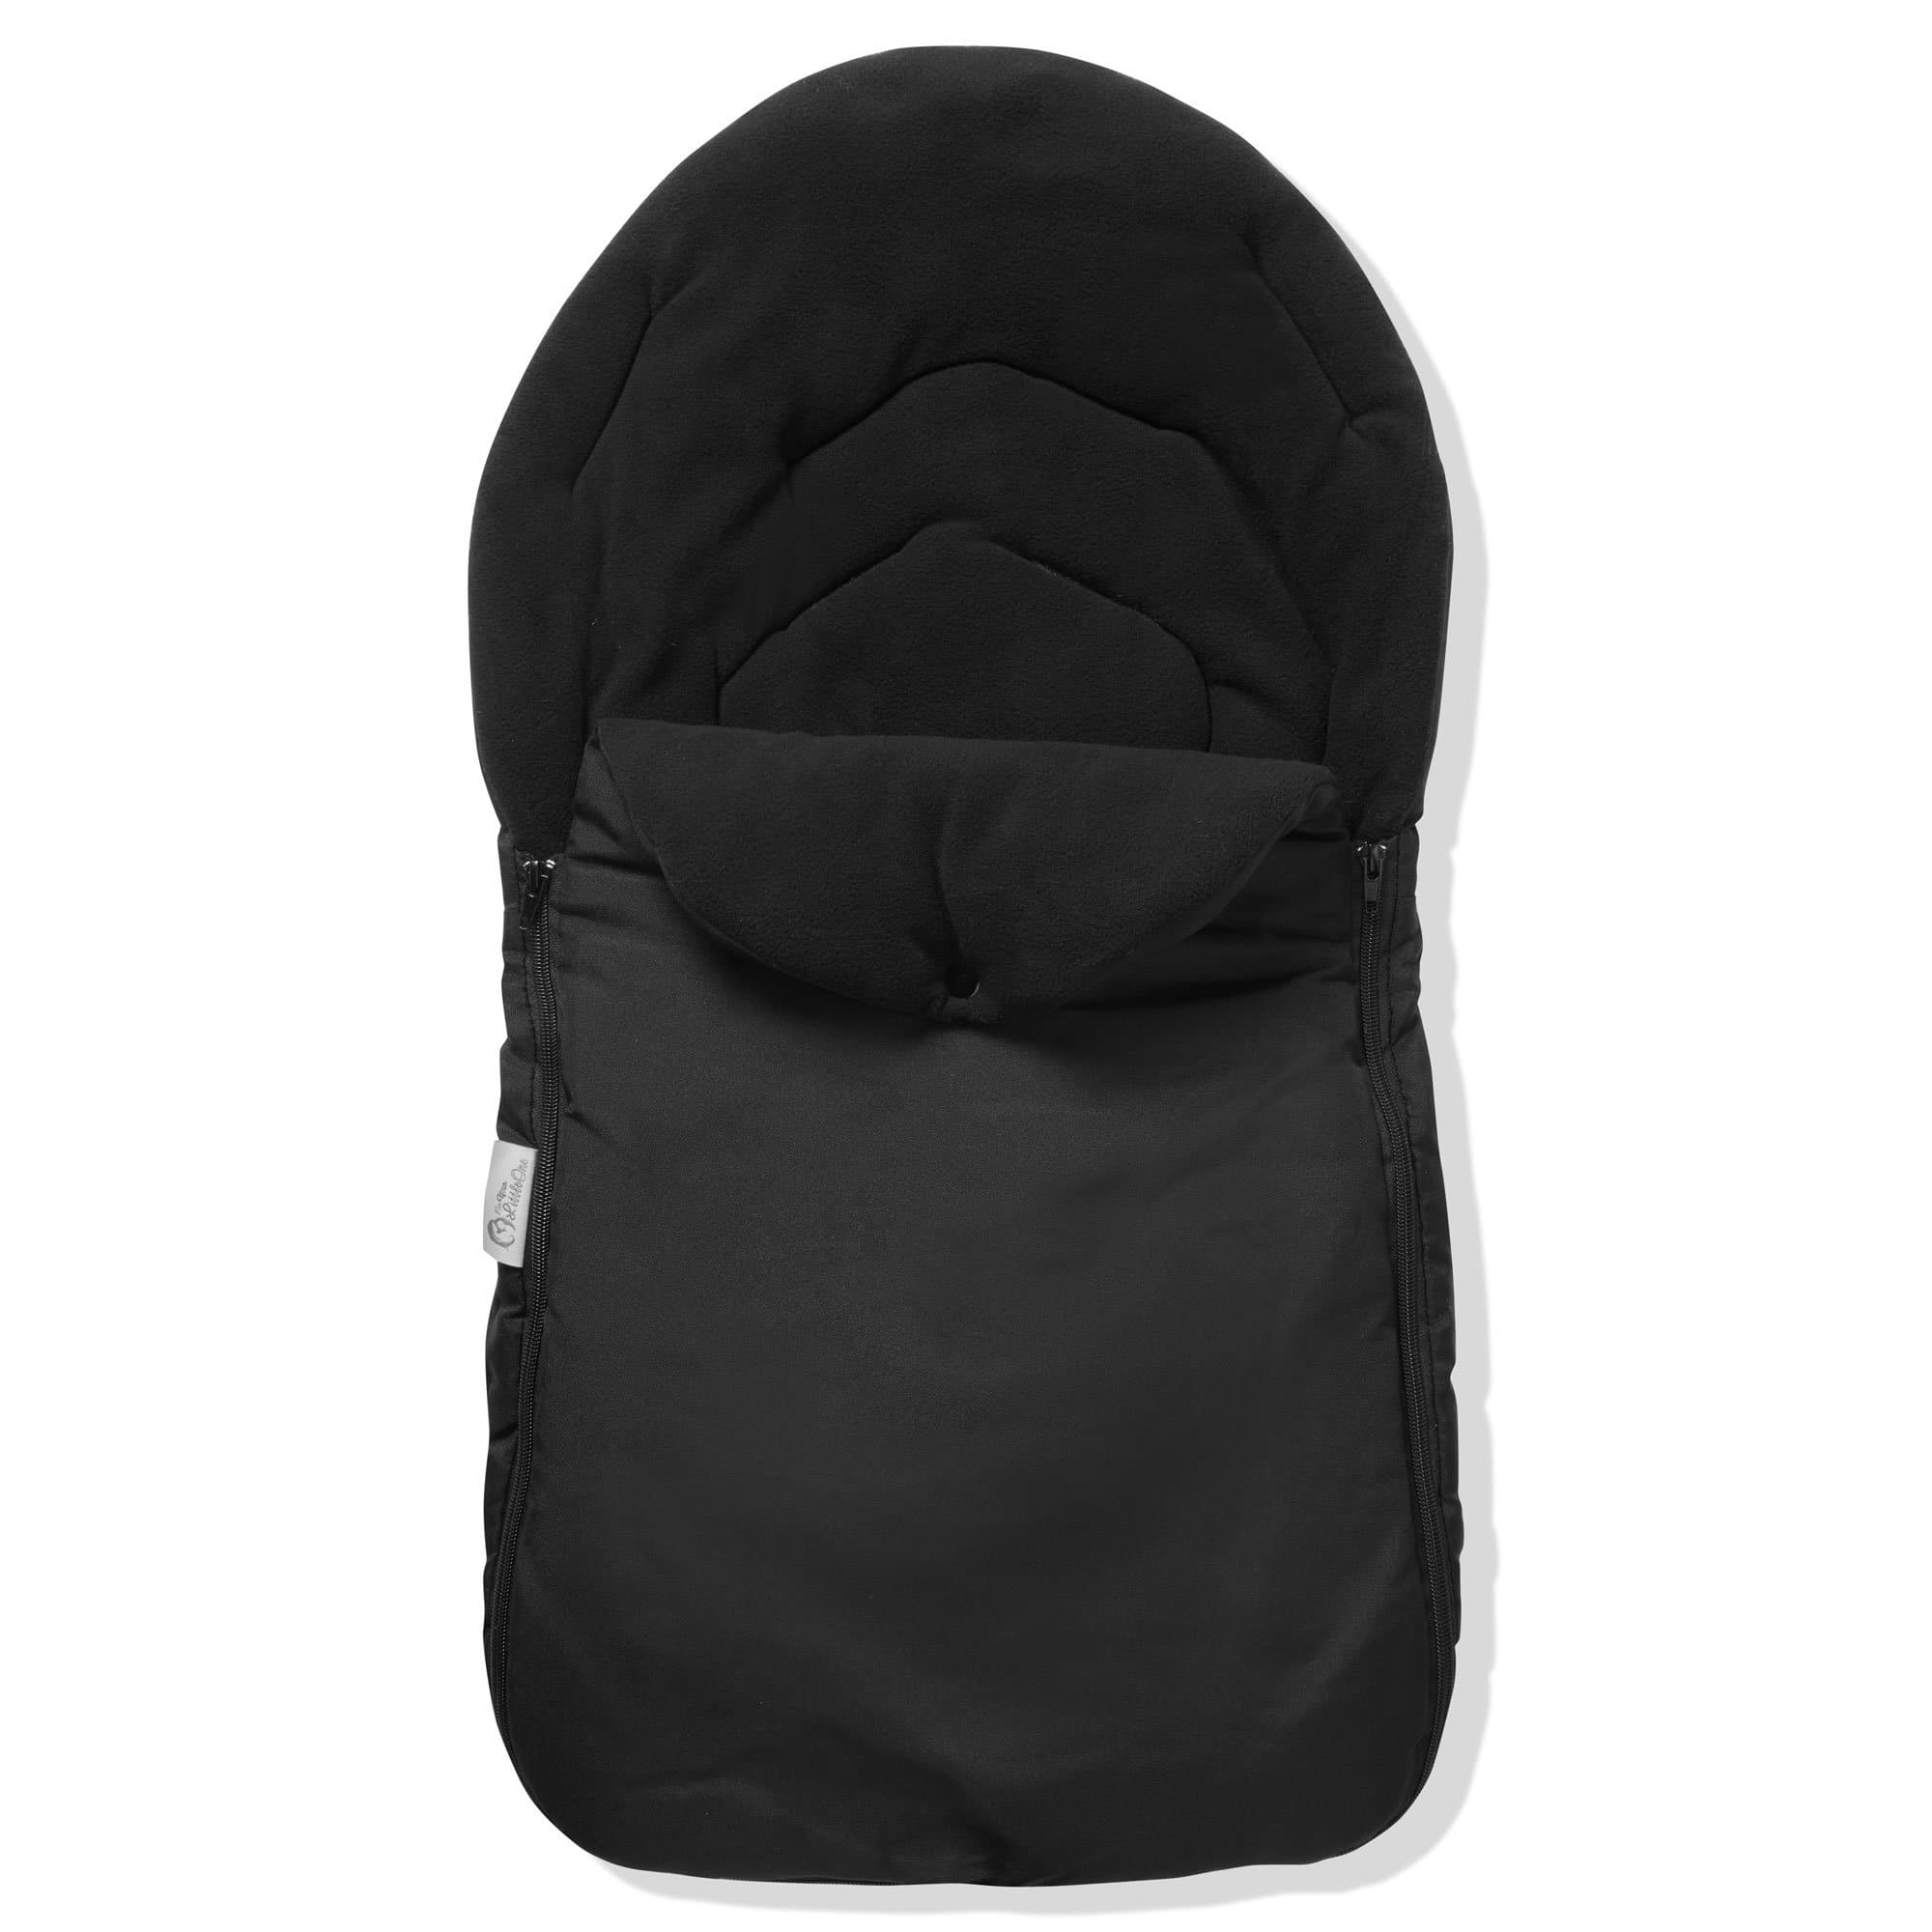 Car Seat Footmuff / Cosy Toes Compatible with Ickle Bubba - Black / Fits All Models | For Your Little One